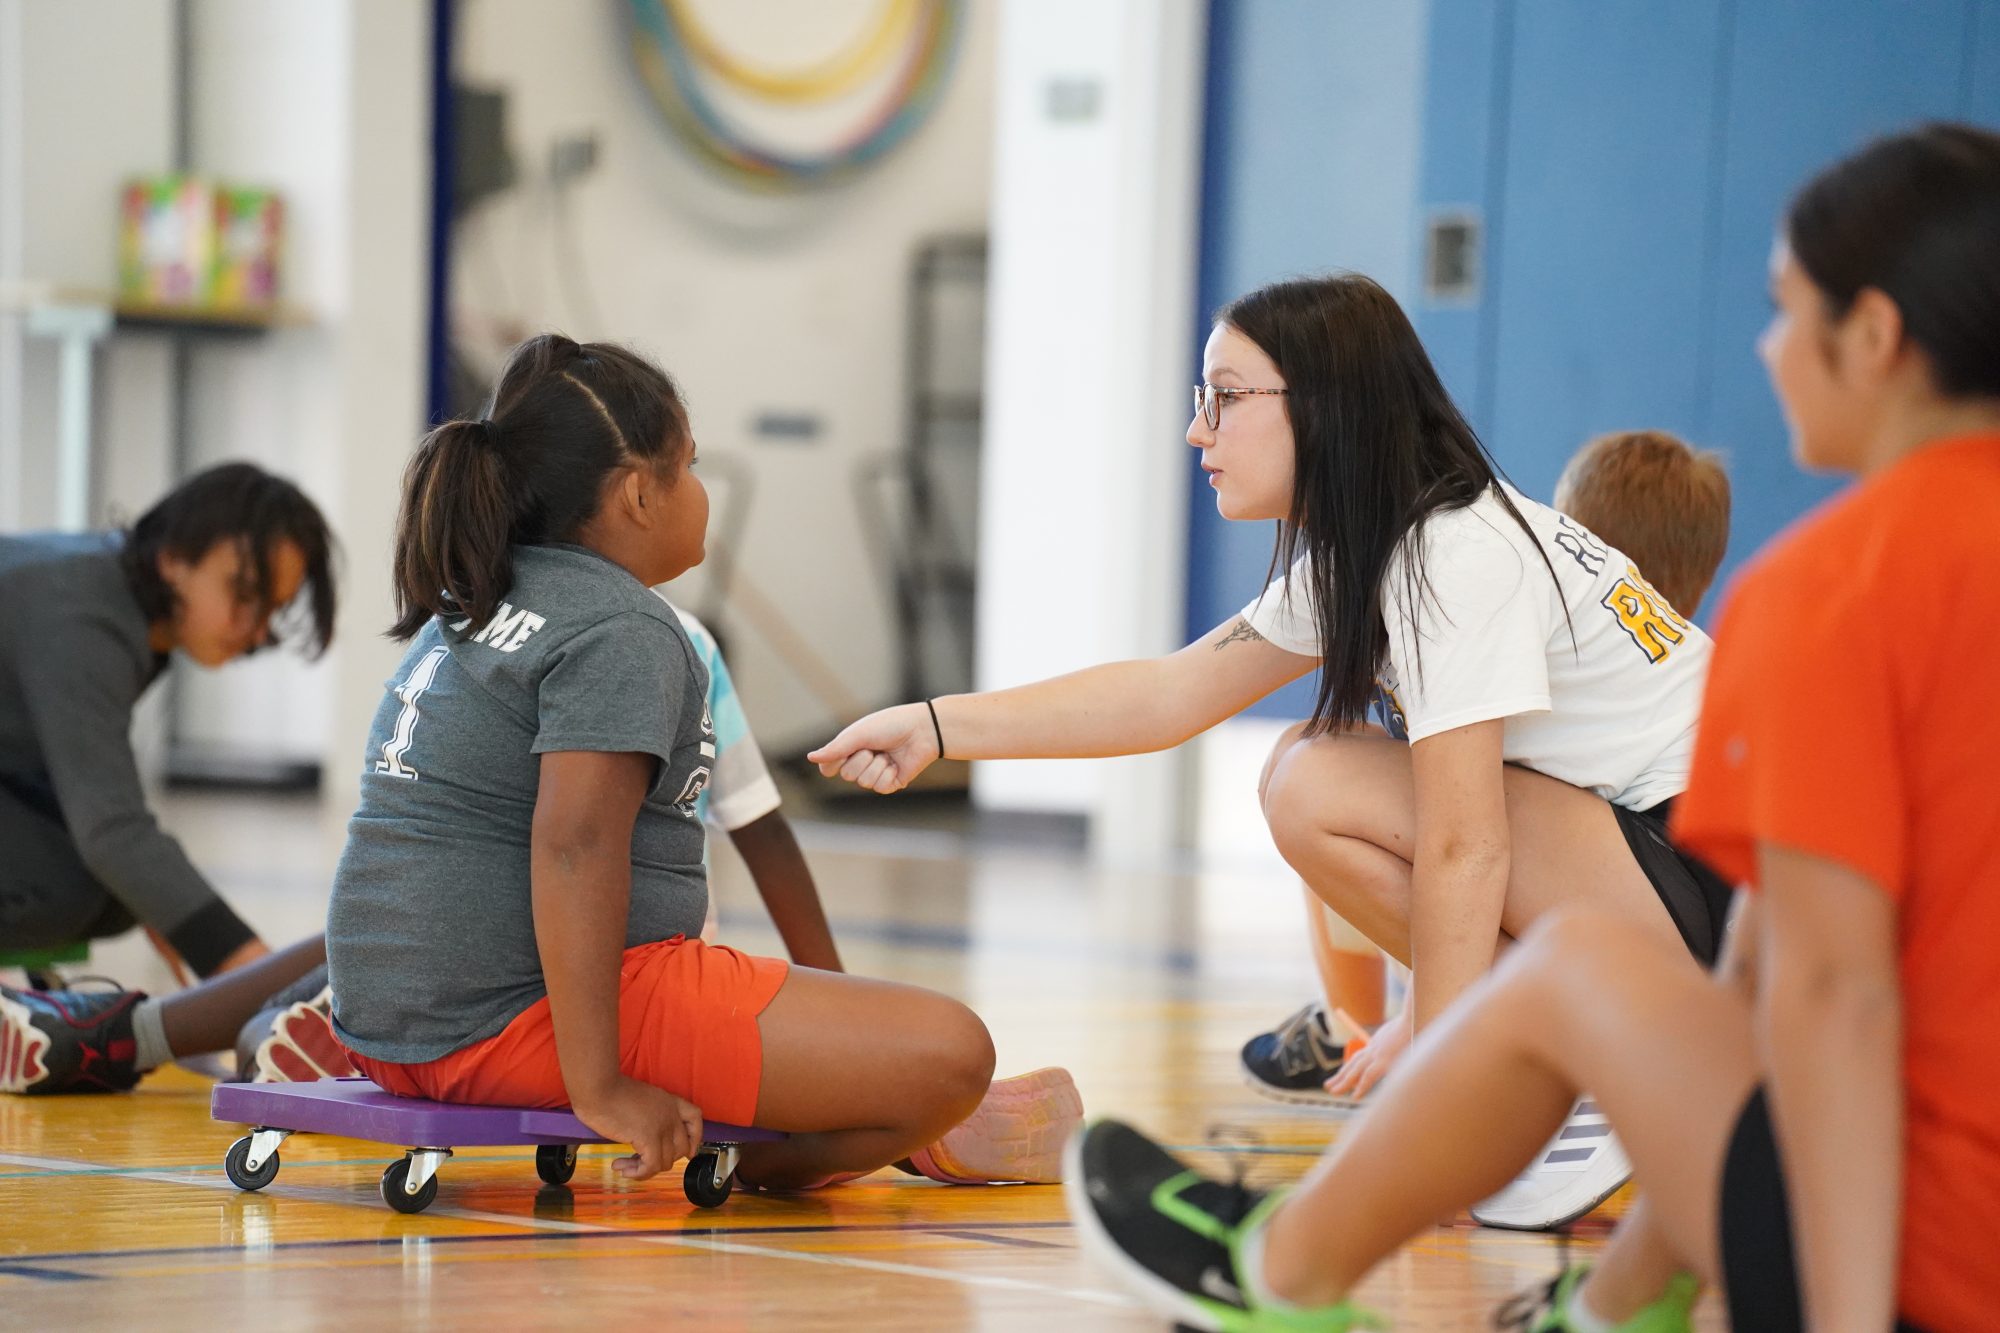 A kinesiology student provides instructions for young students participating in a gym activity on floor scooters.